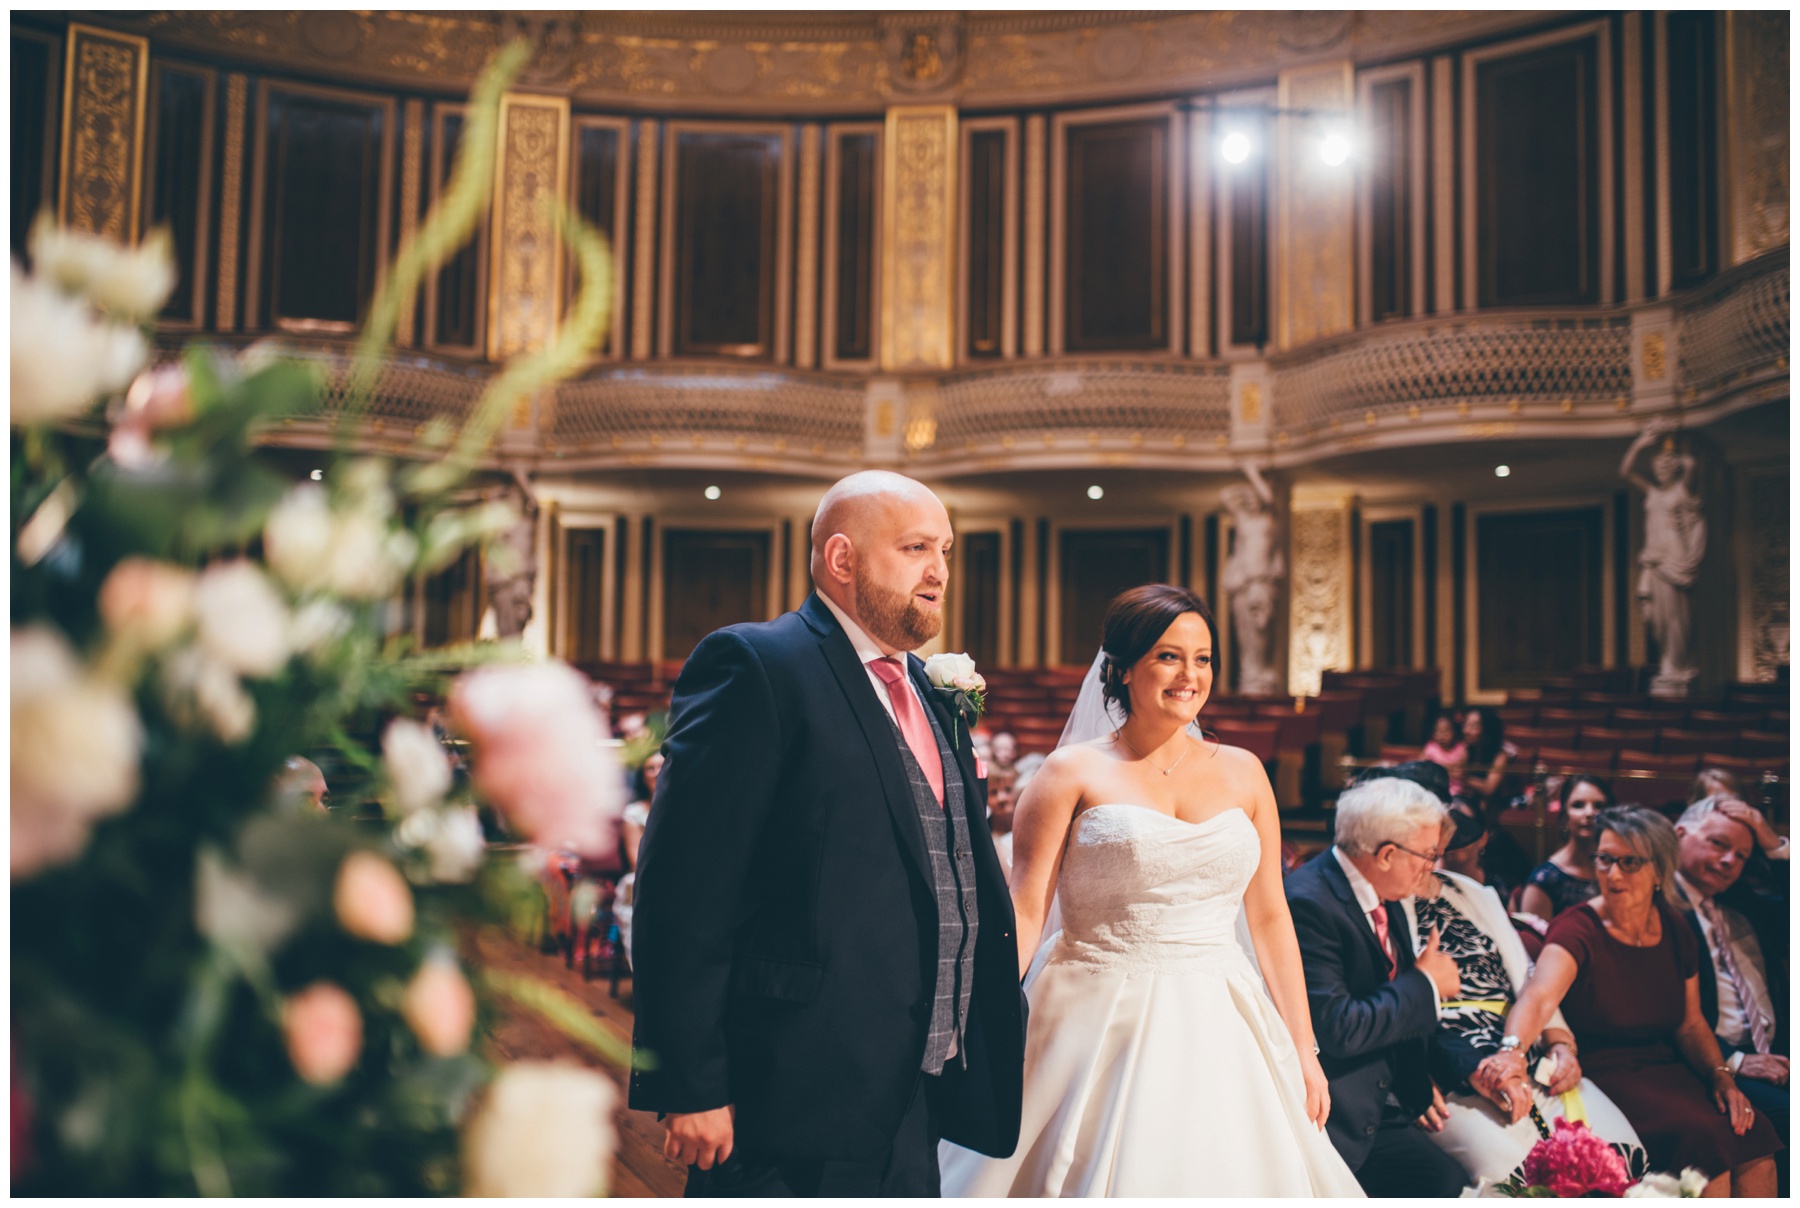 St Georges Hall wedding in Liverpool City Centre.